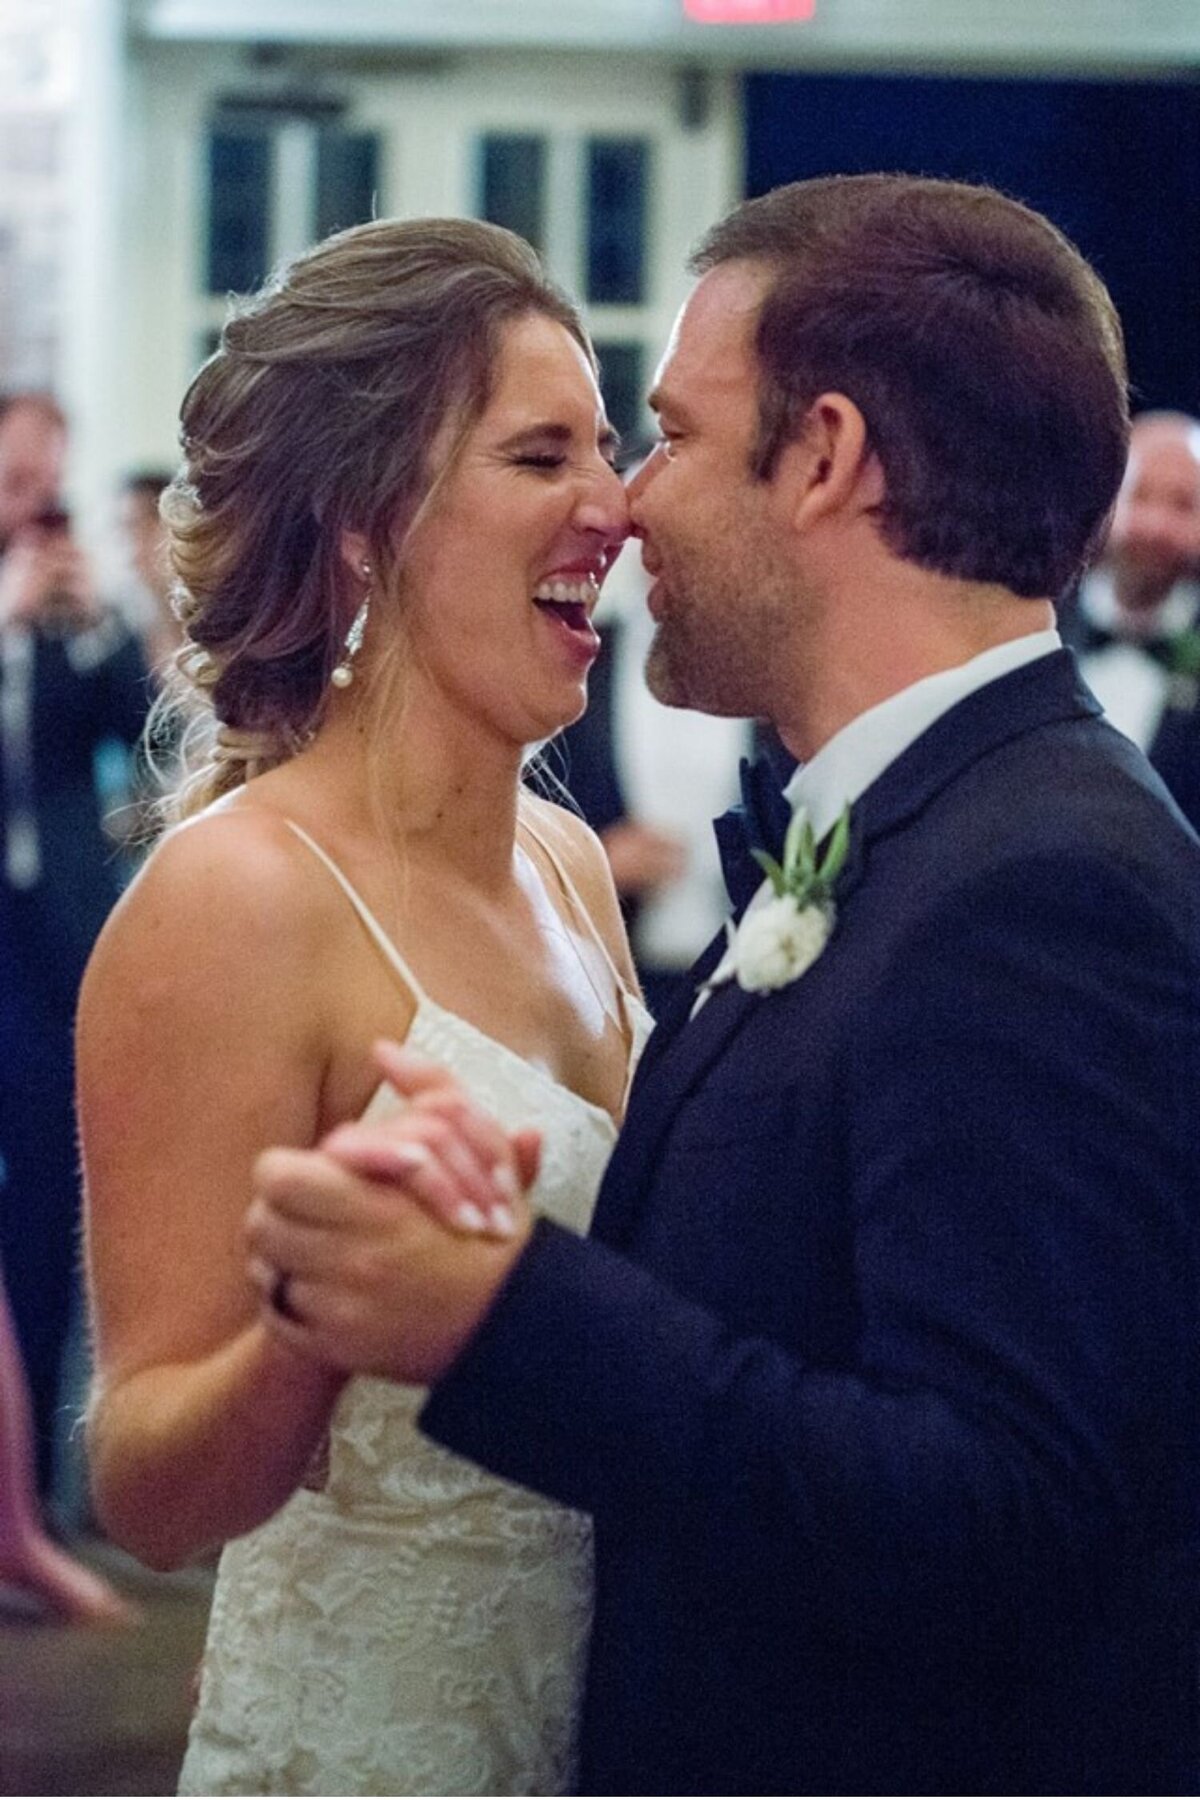 Smiling bride during her first dance at a luxury Italian inspired Chicago North Shore wedding.